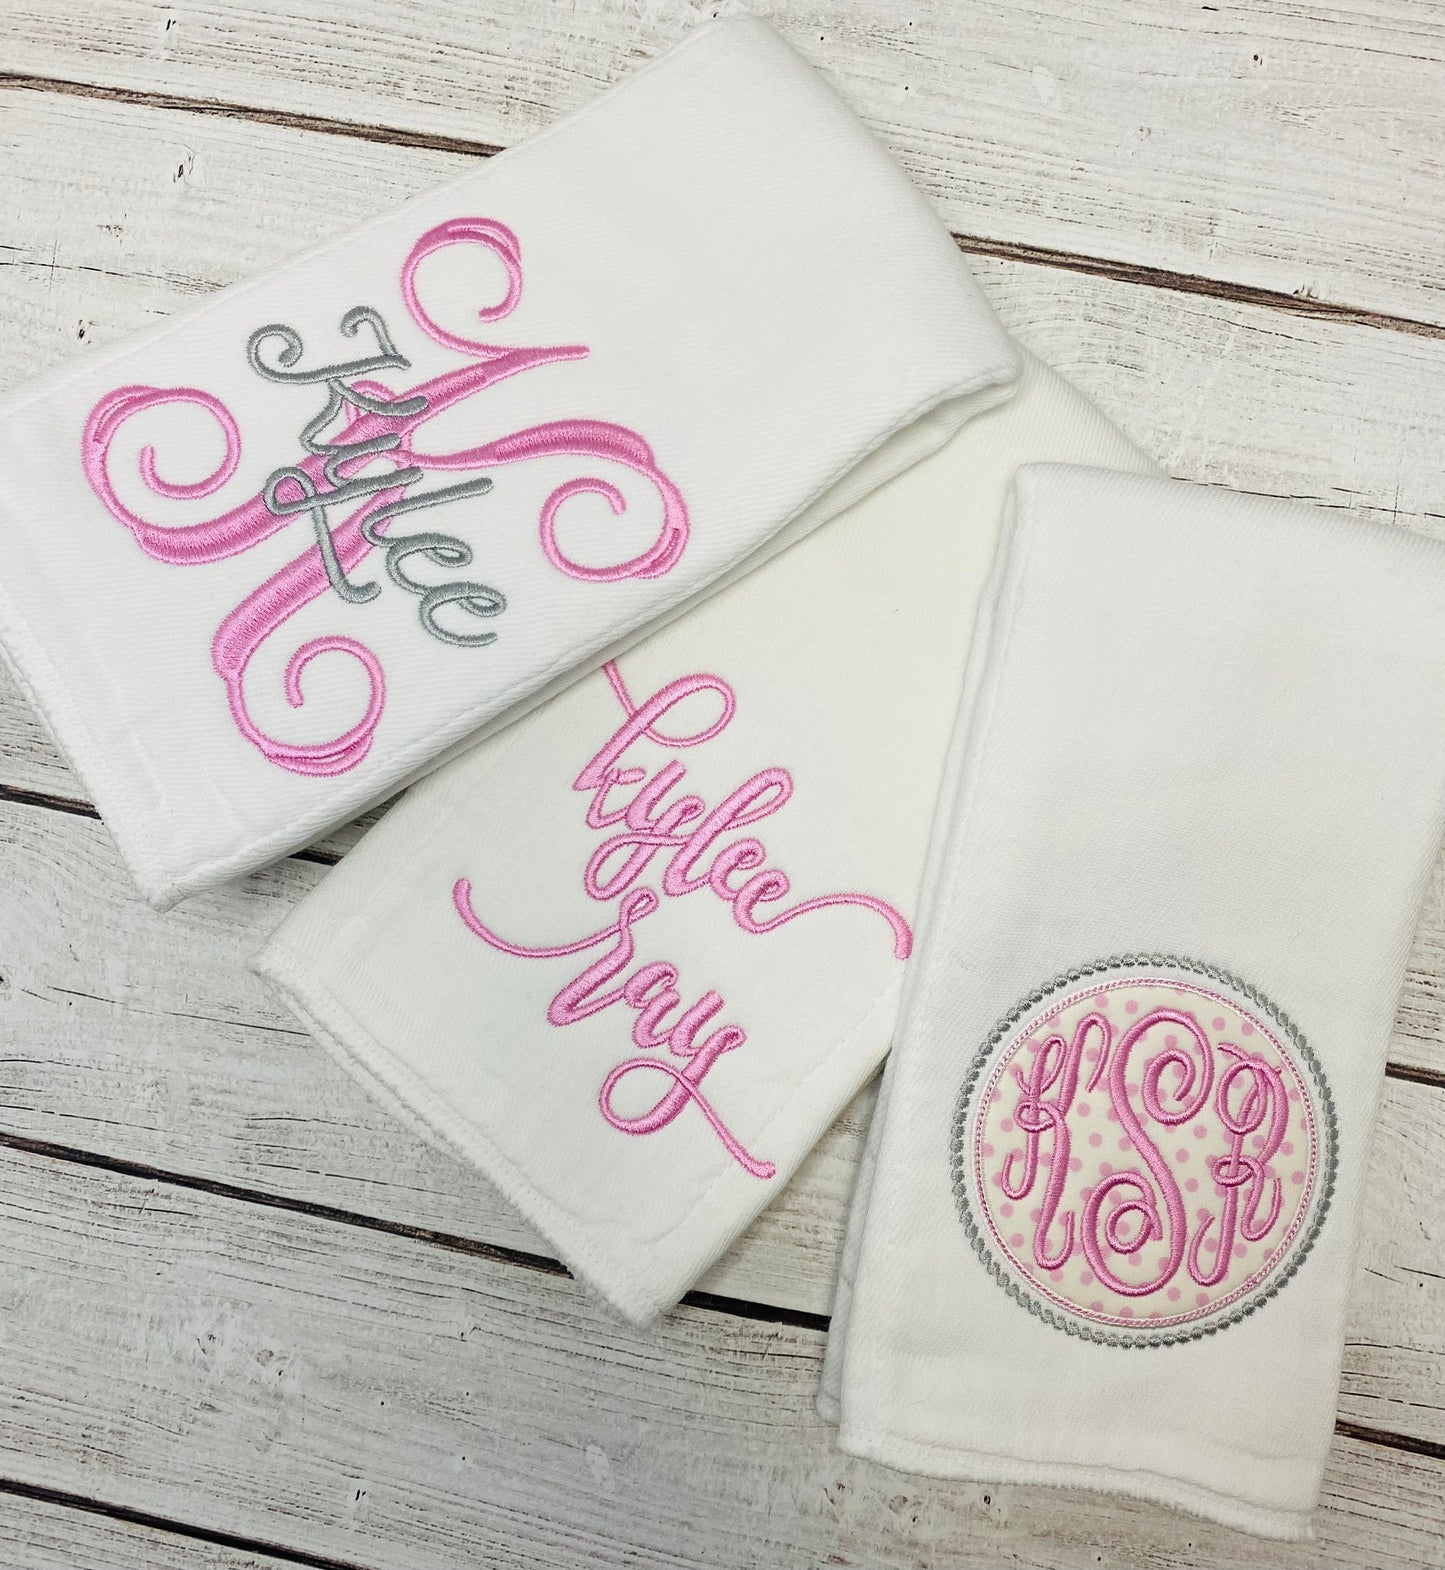 Personalized Baby Girl Burp Cloth Set